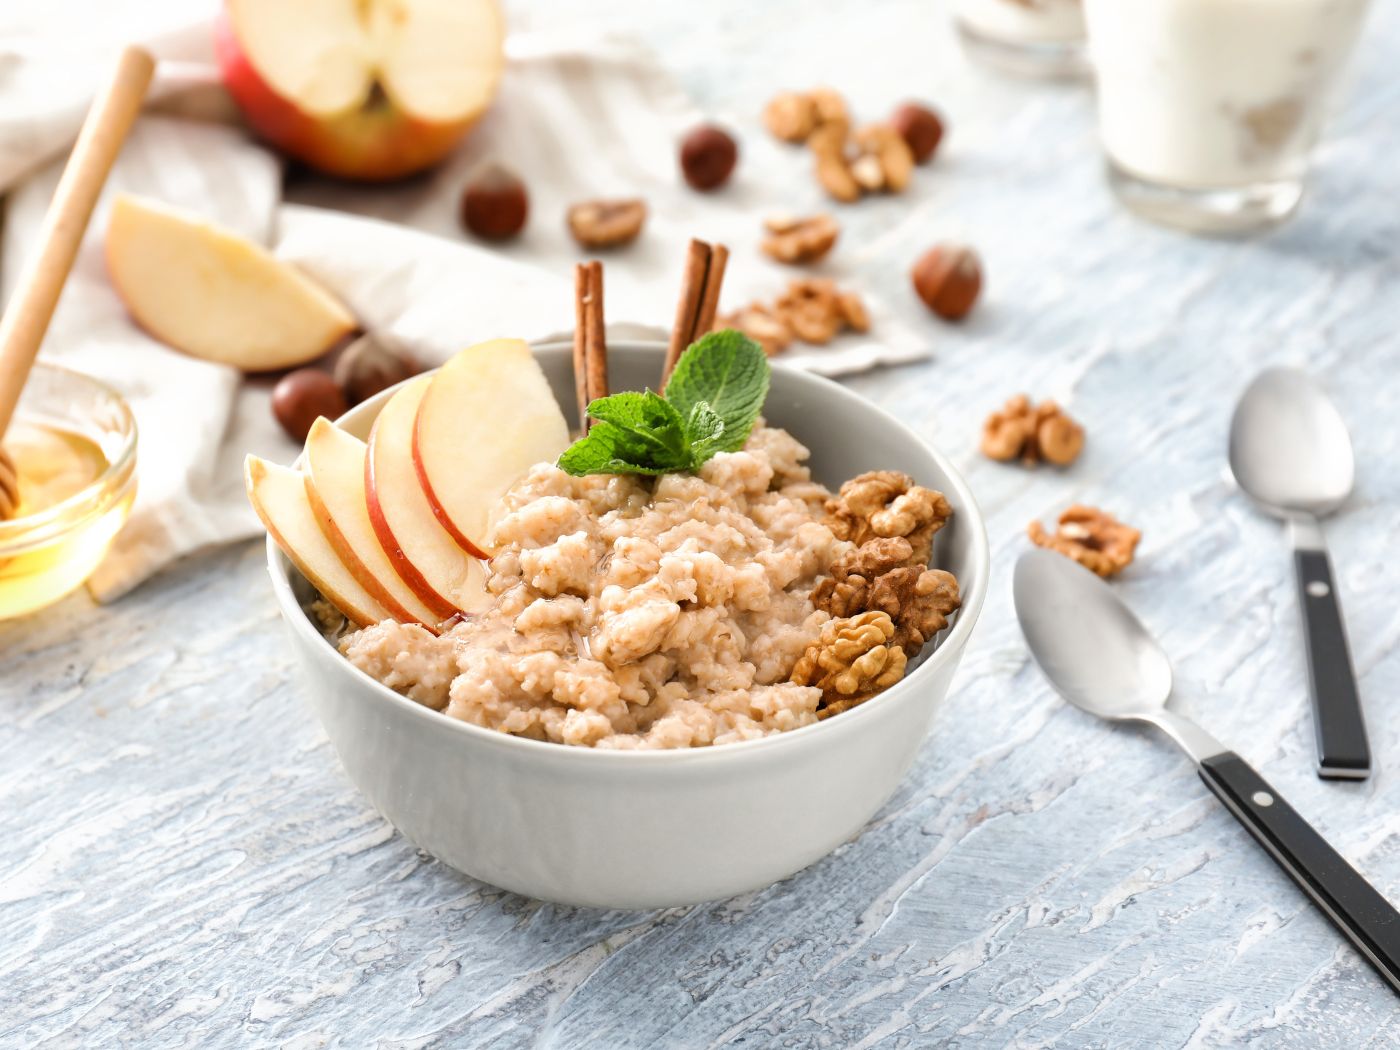 7 High Protein Oatmeal Recipes to Fuel You Up